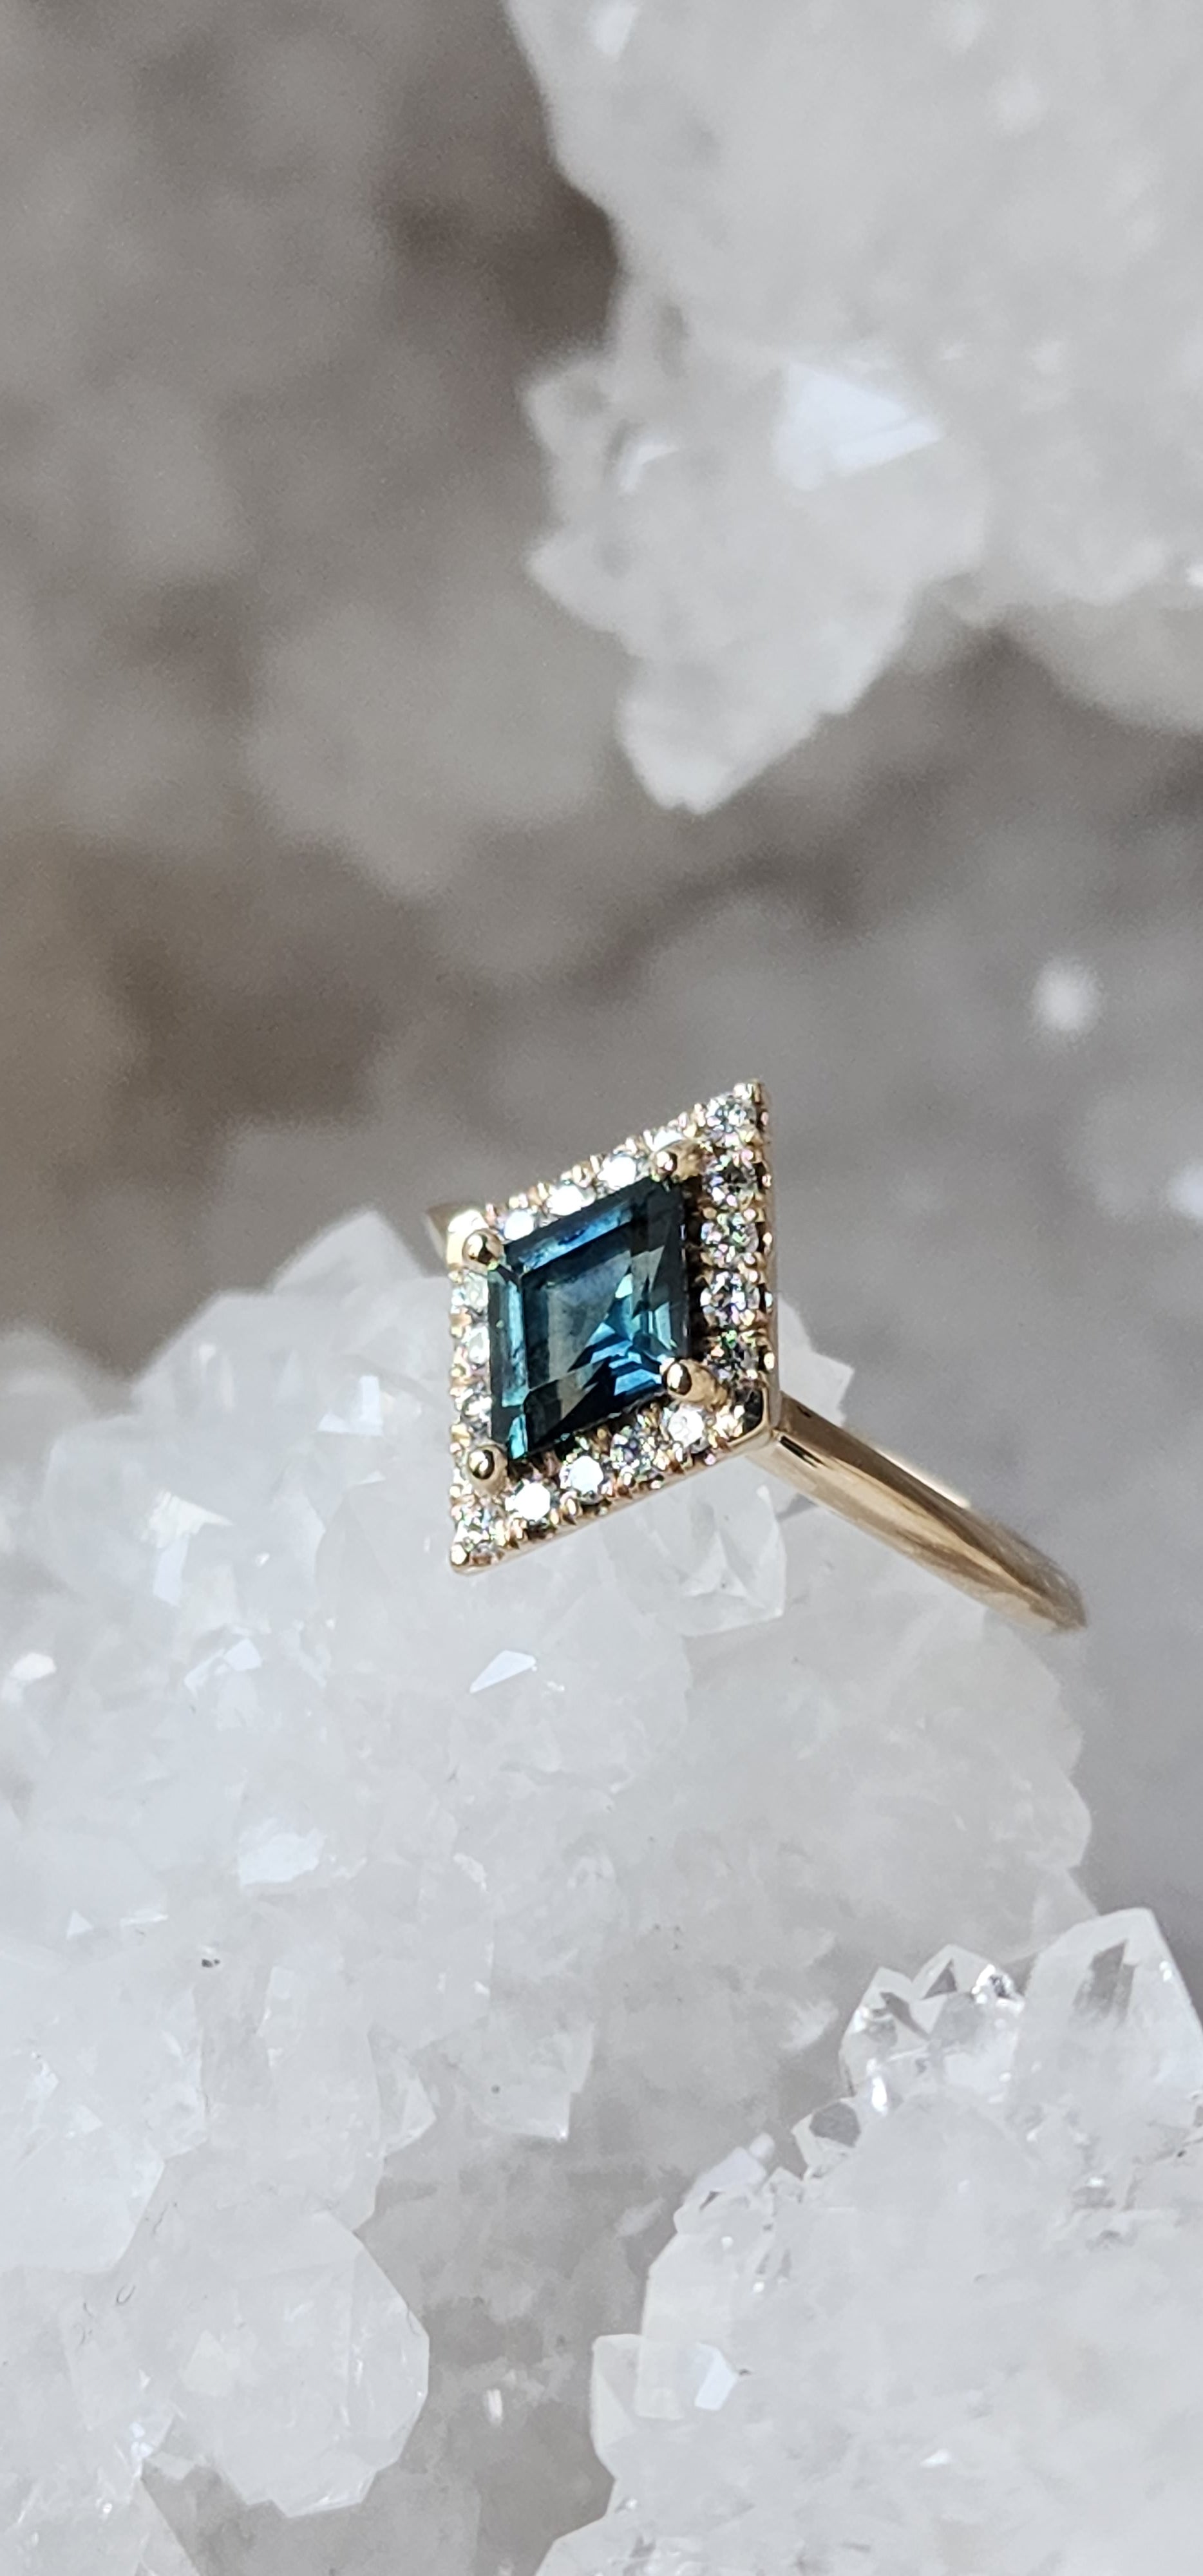 Ring - .95 CT Montana Sapphire Teal Lozenge Cut with Halo Design in 14k Yellow Gold